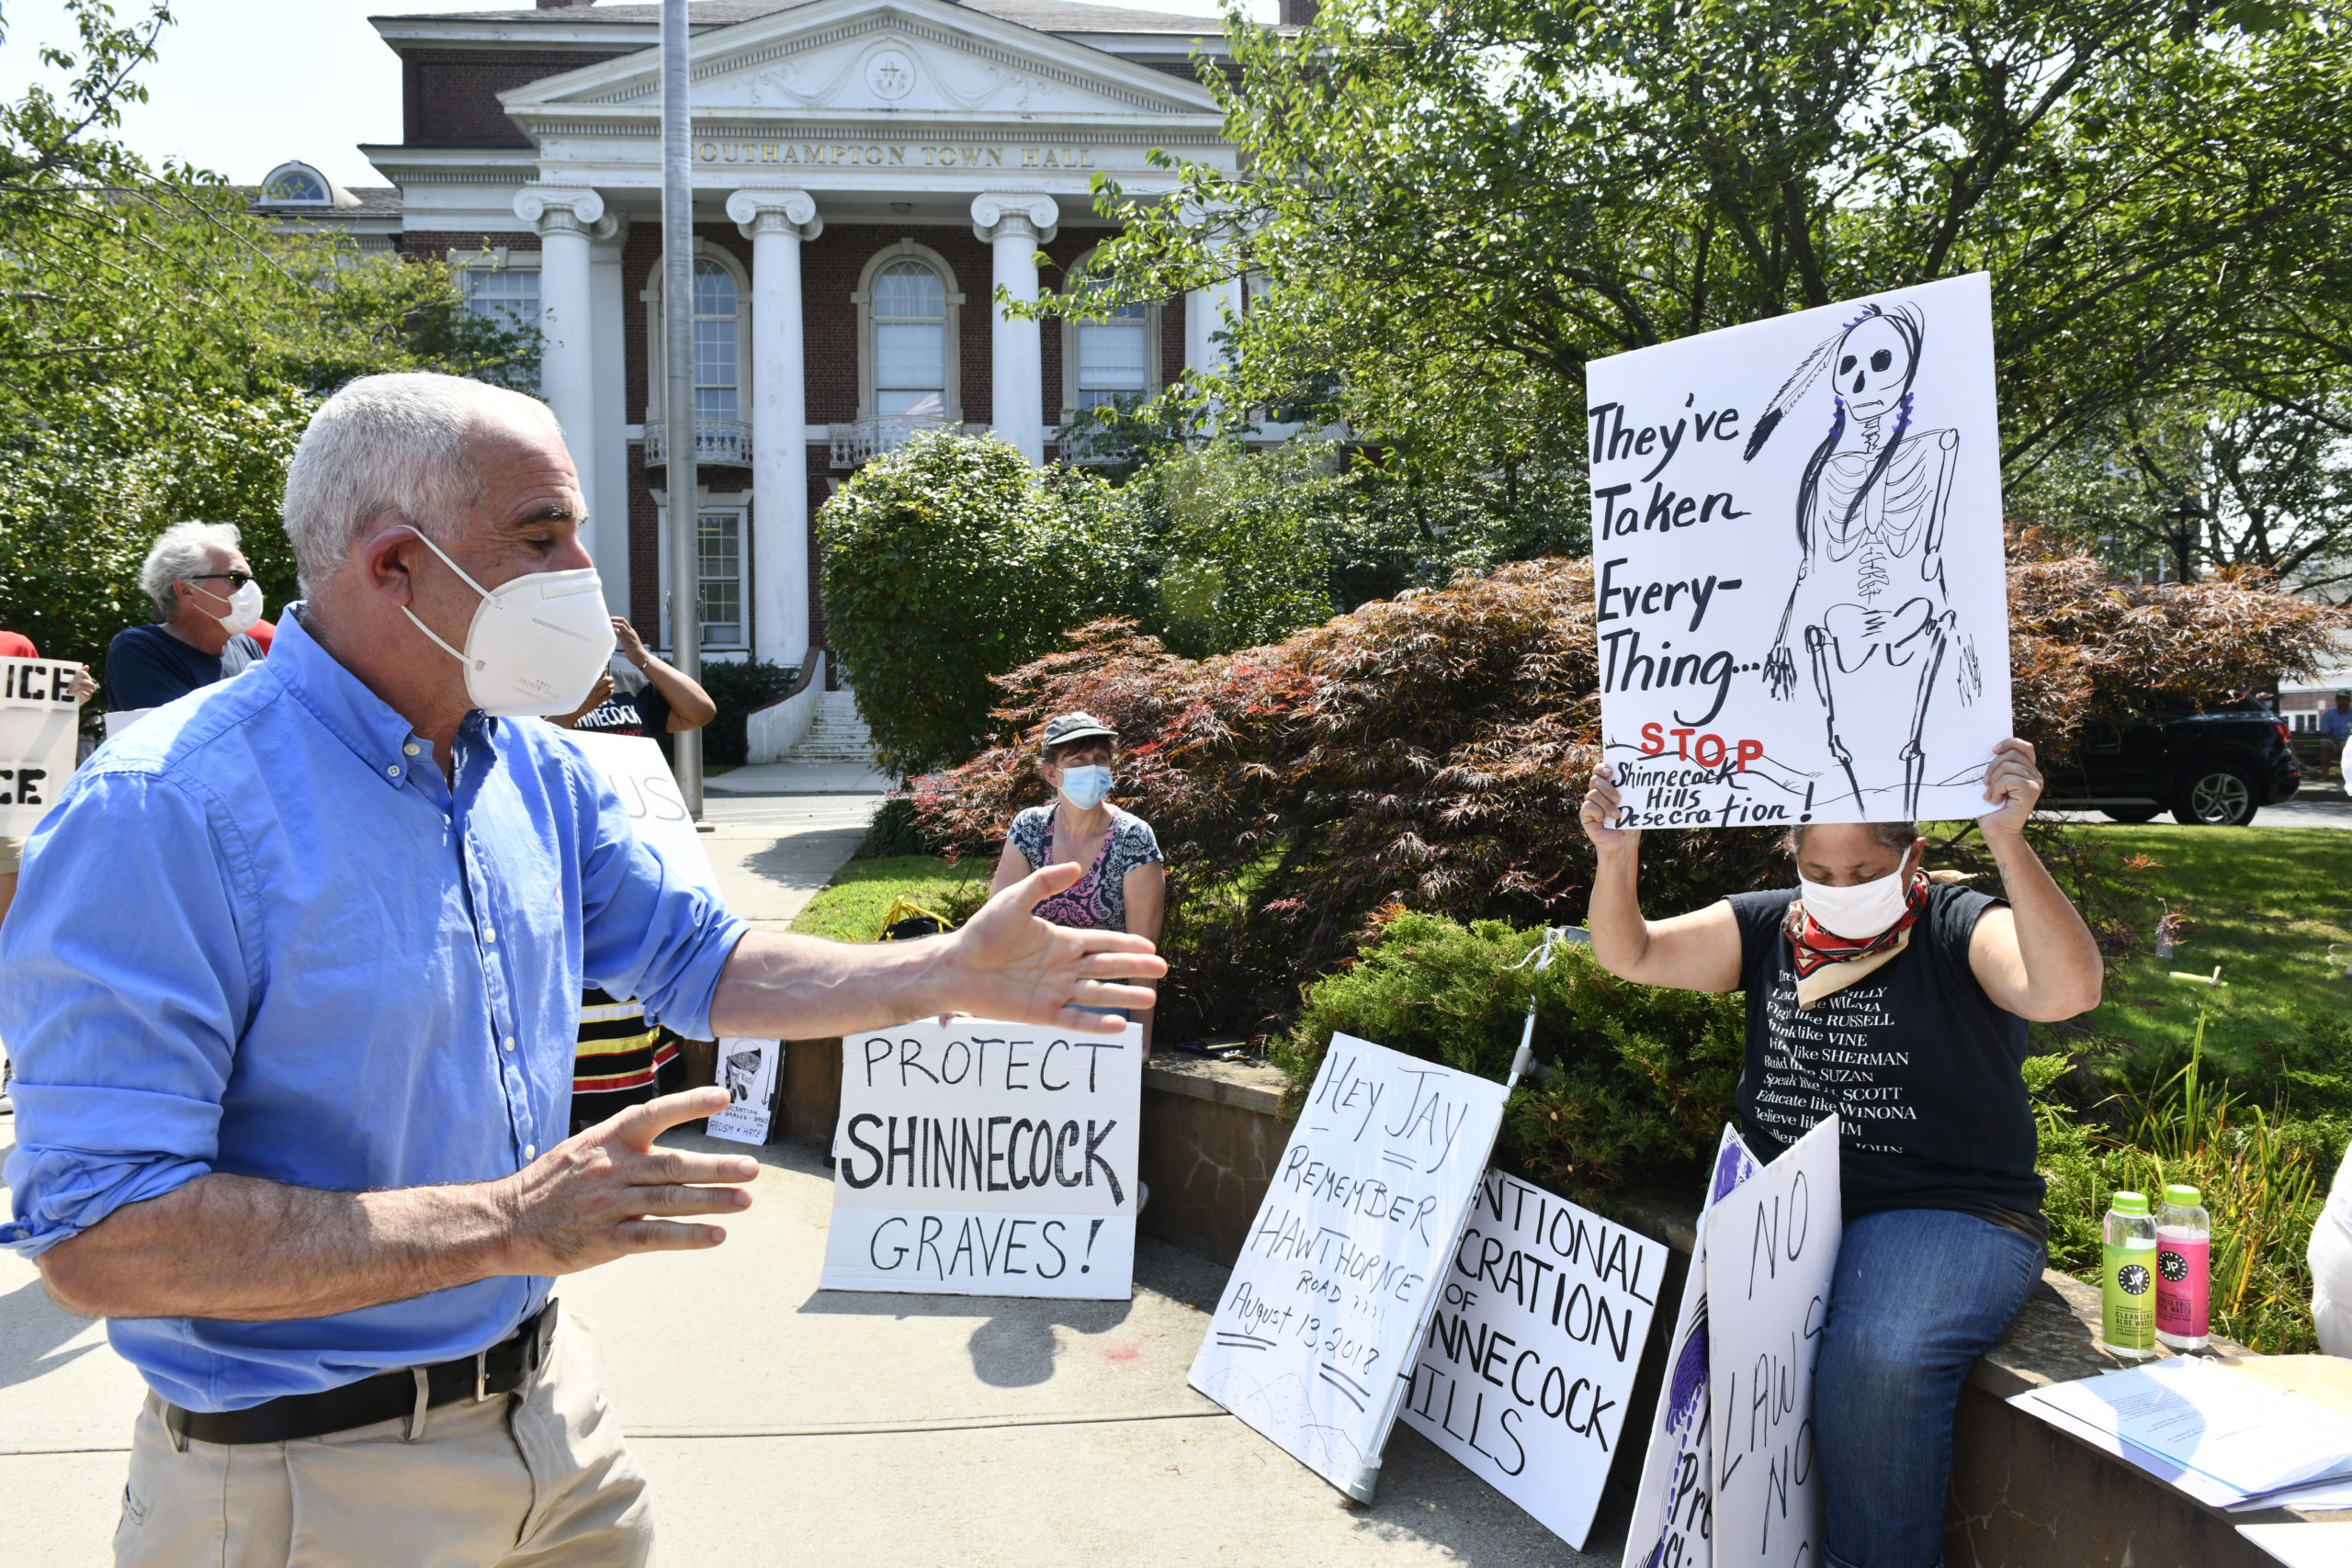 Protesters confronted Southampton Town Supervisor Jay Schneiderman in front of Town Hall in late August about creating legislation for graves protection.  DANA SHAW